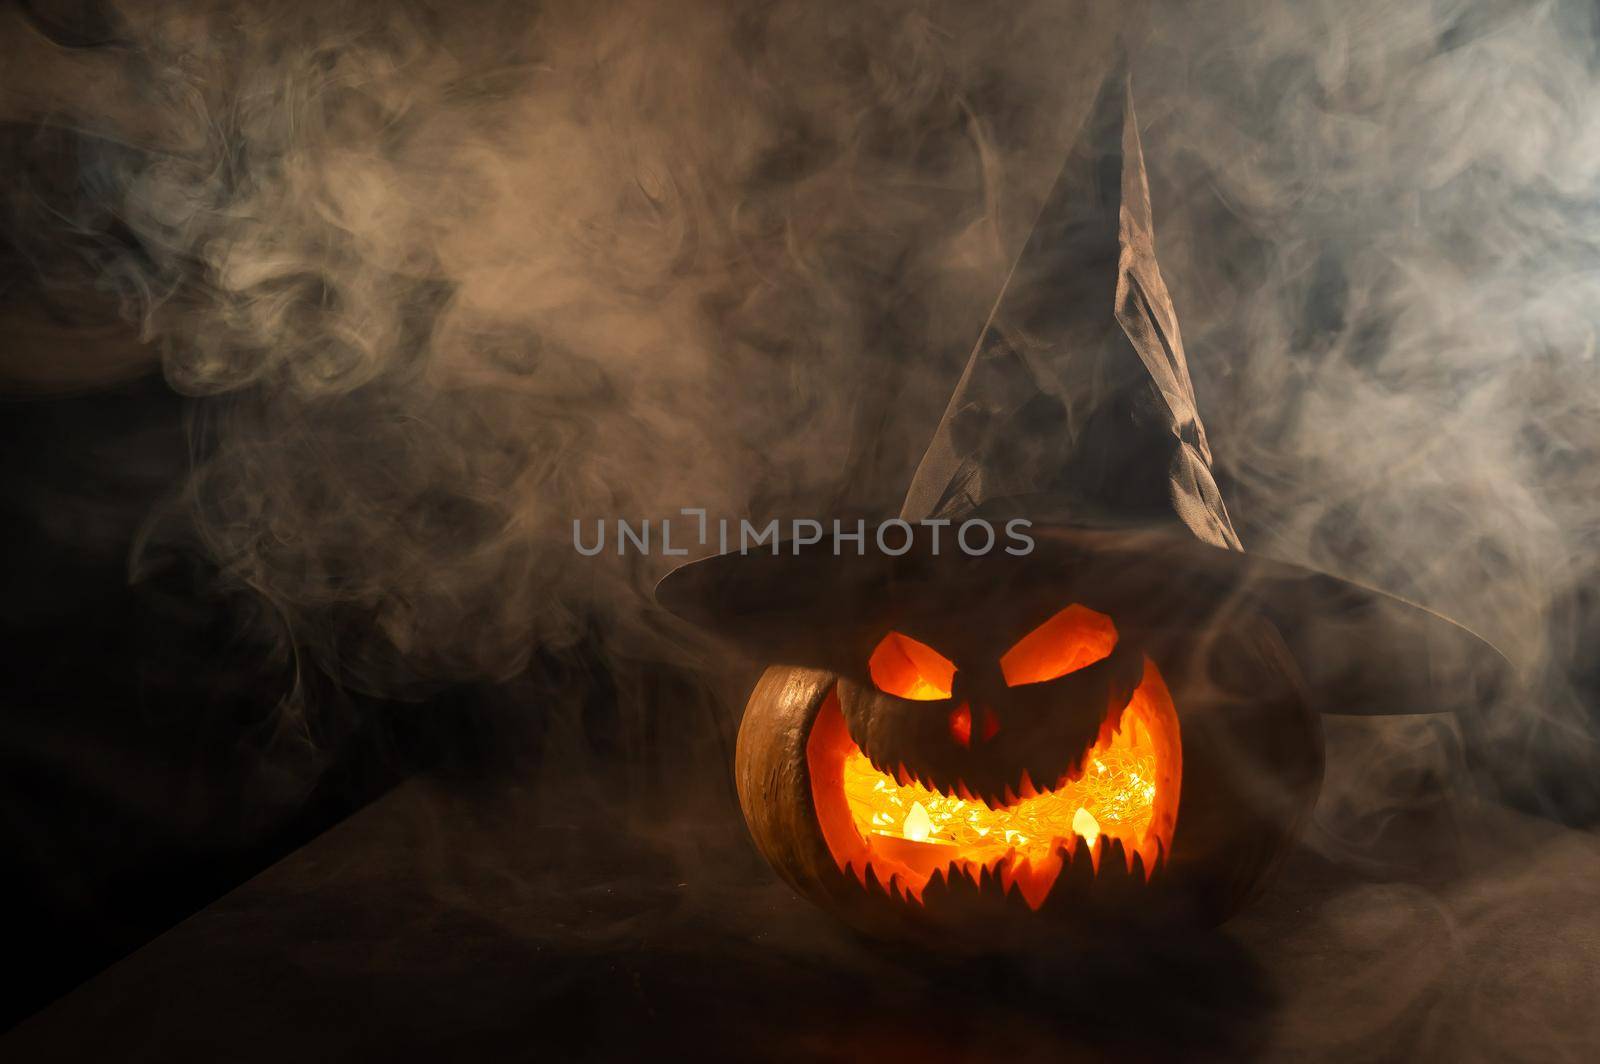 A creepy pumpkin with a carved grimace in the smoke. Jack o lantern in the dark. by mrwed54